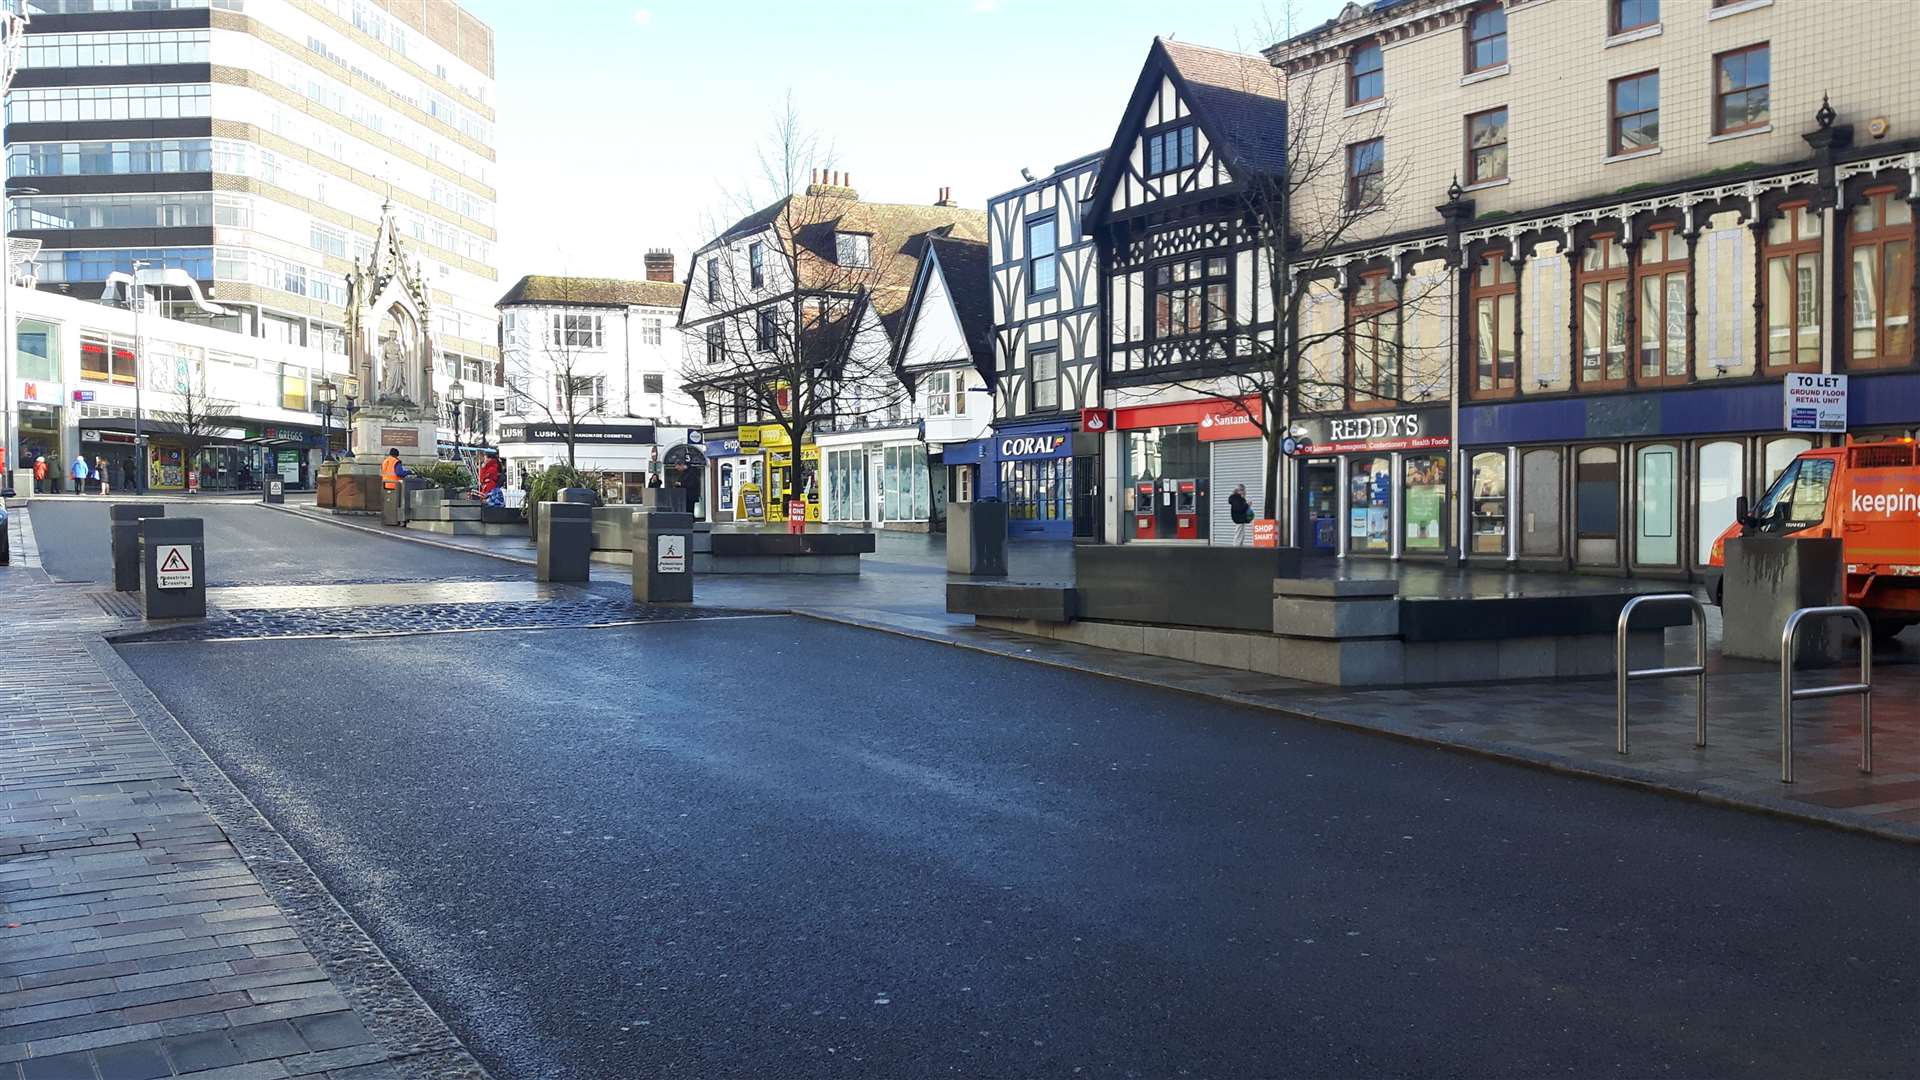 Jubilee Square in Maidstone saw marked drop in footfall today